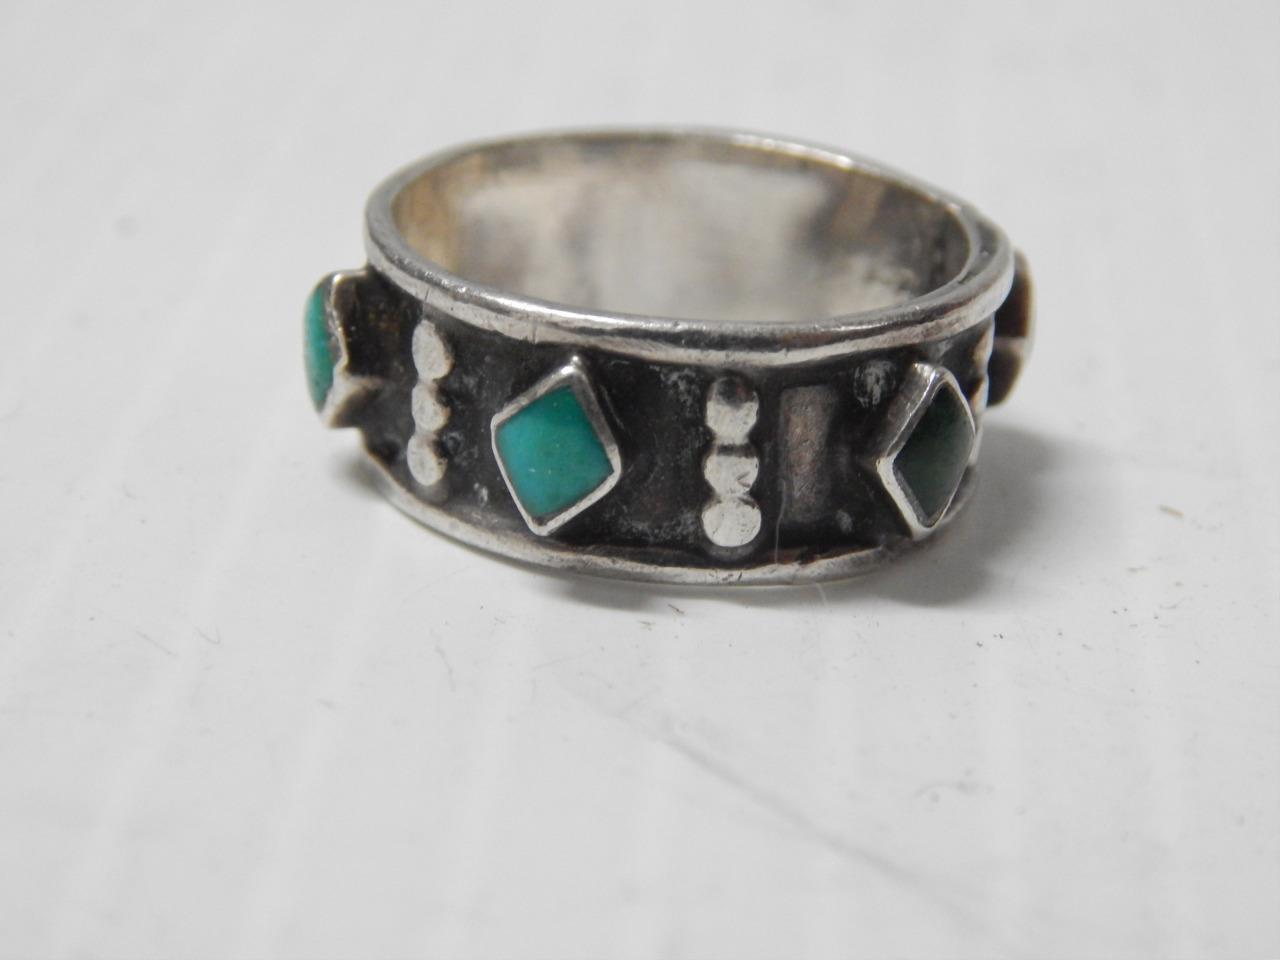 VINTAGE NAVAJO STERLING SILVER TURQUOISE BAND STYLE RING sz: 8 1/4